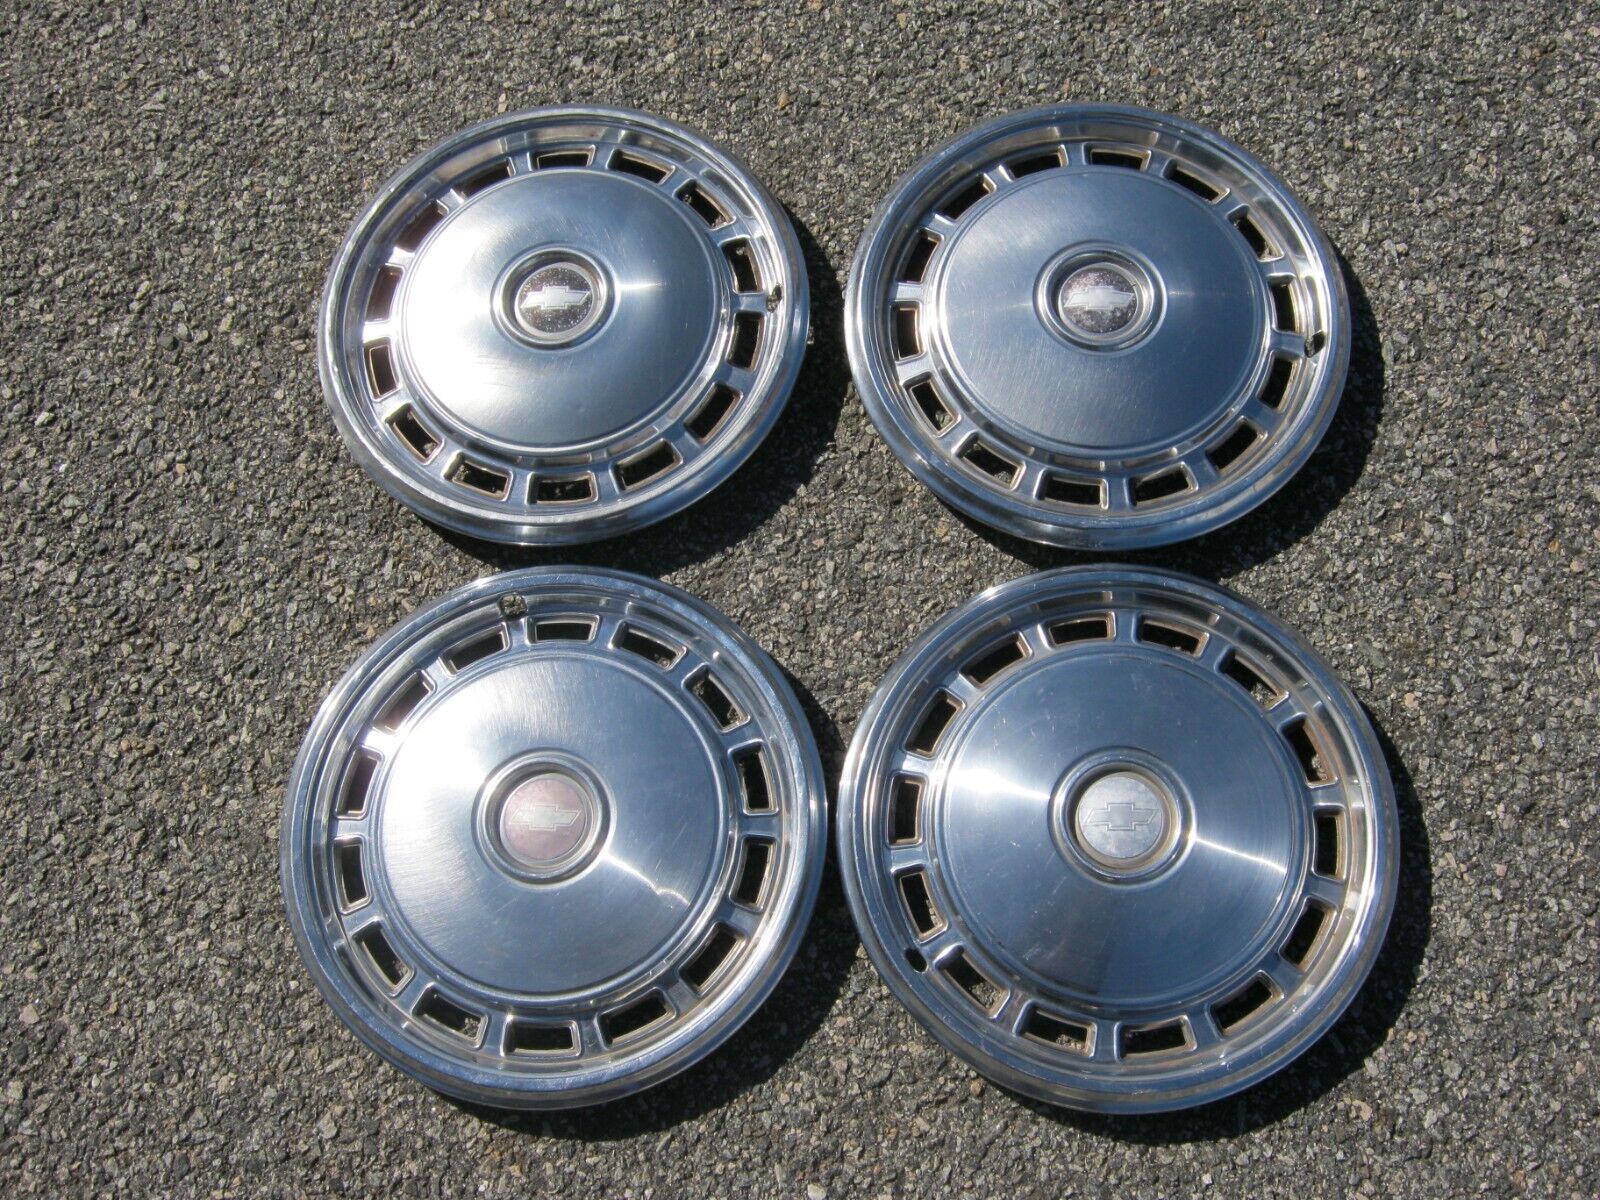 Factory 1975 to 1980 Chevy Monza Vega 13 inch metal hubcaps wheel covers